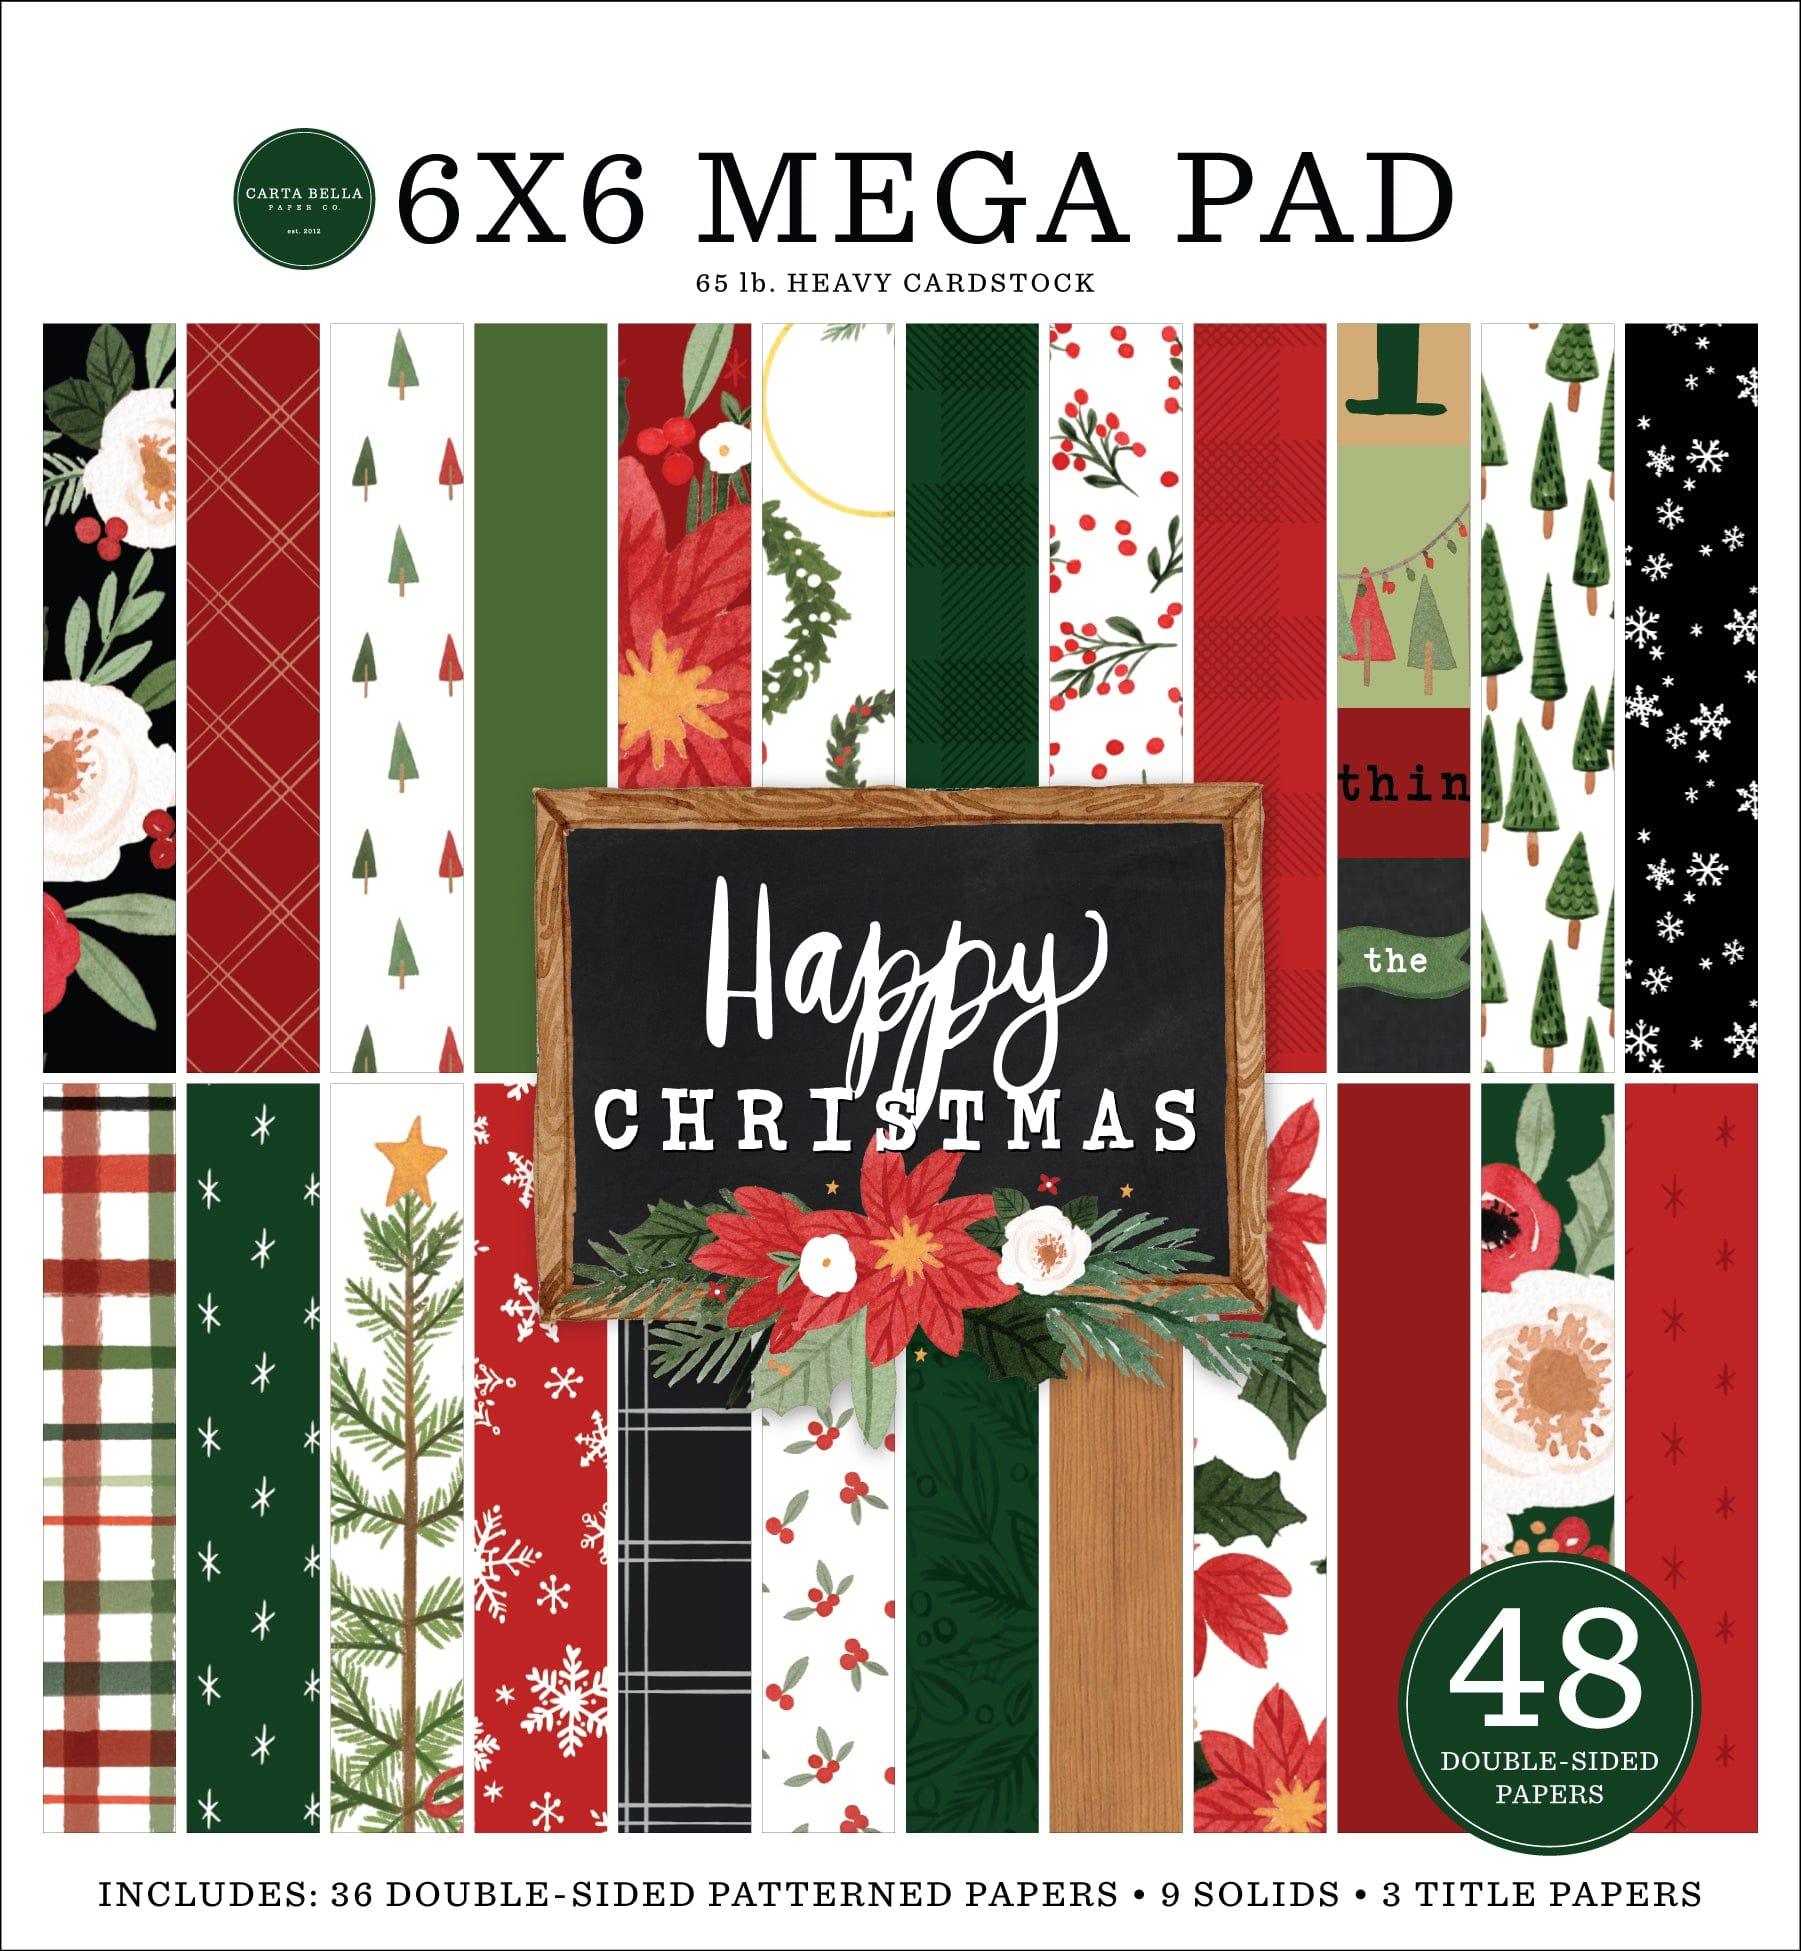 Happy Christmas Collection 6 x 6 Mega Paper Pad by Carta Bella - 48 Double-Sided Papers - Scrapbook Supply Companies